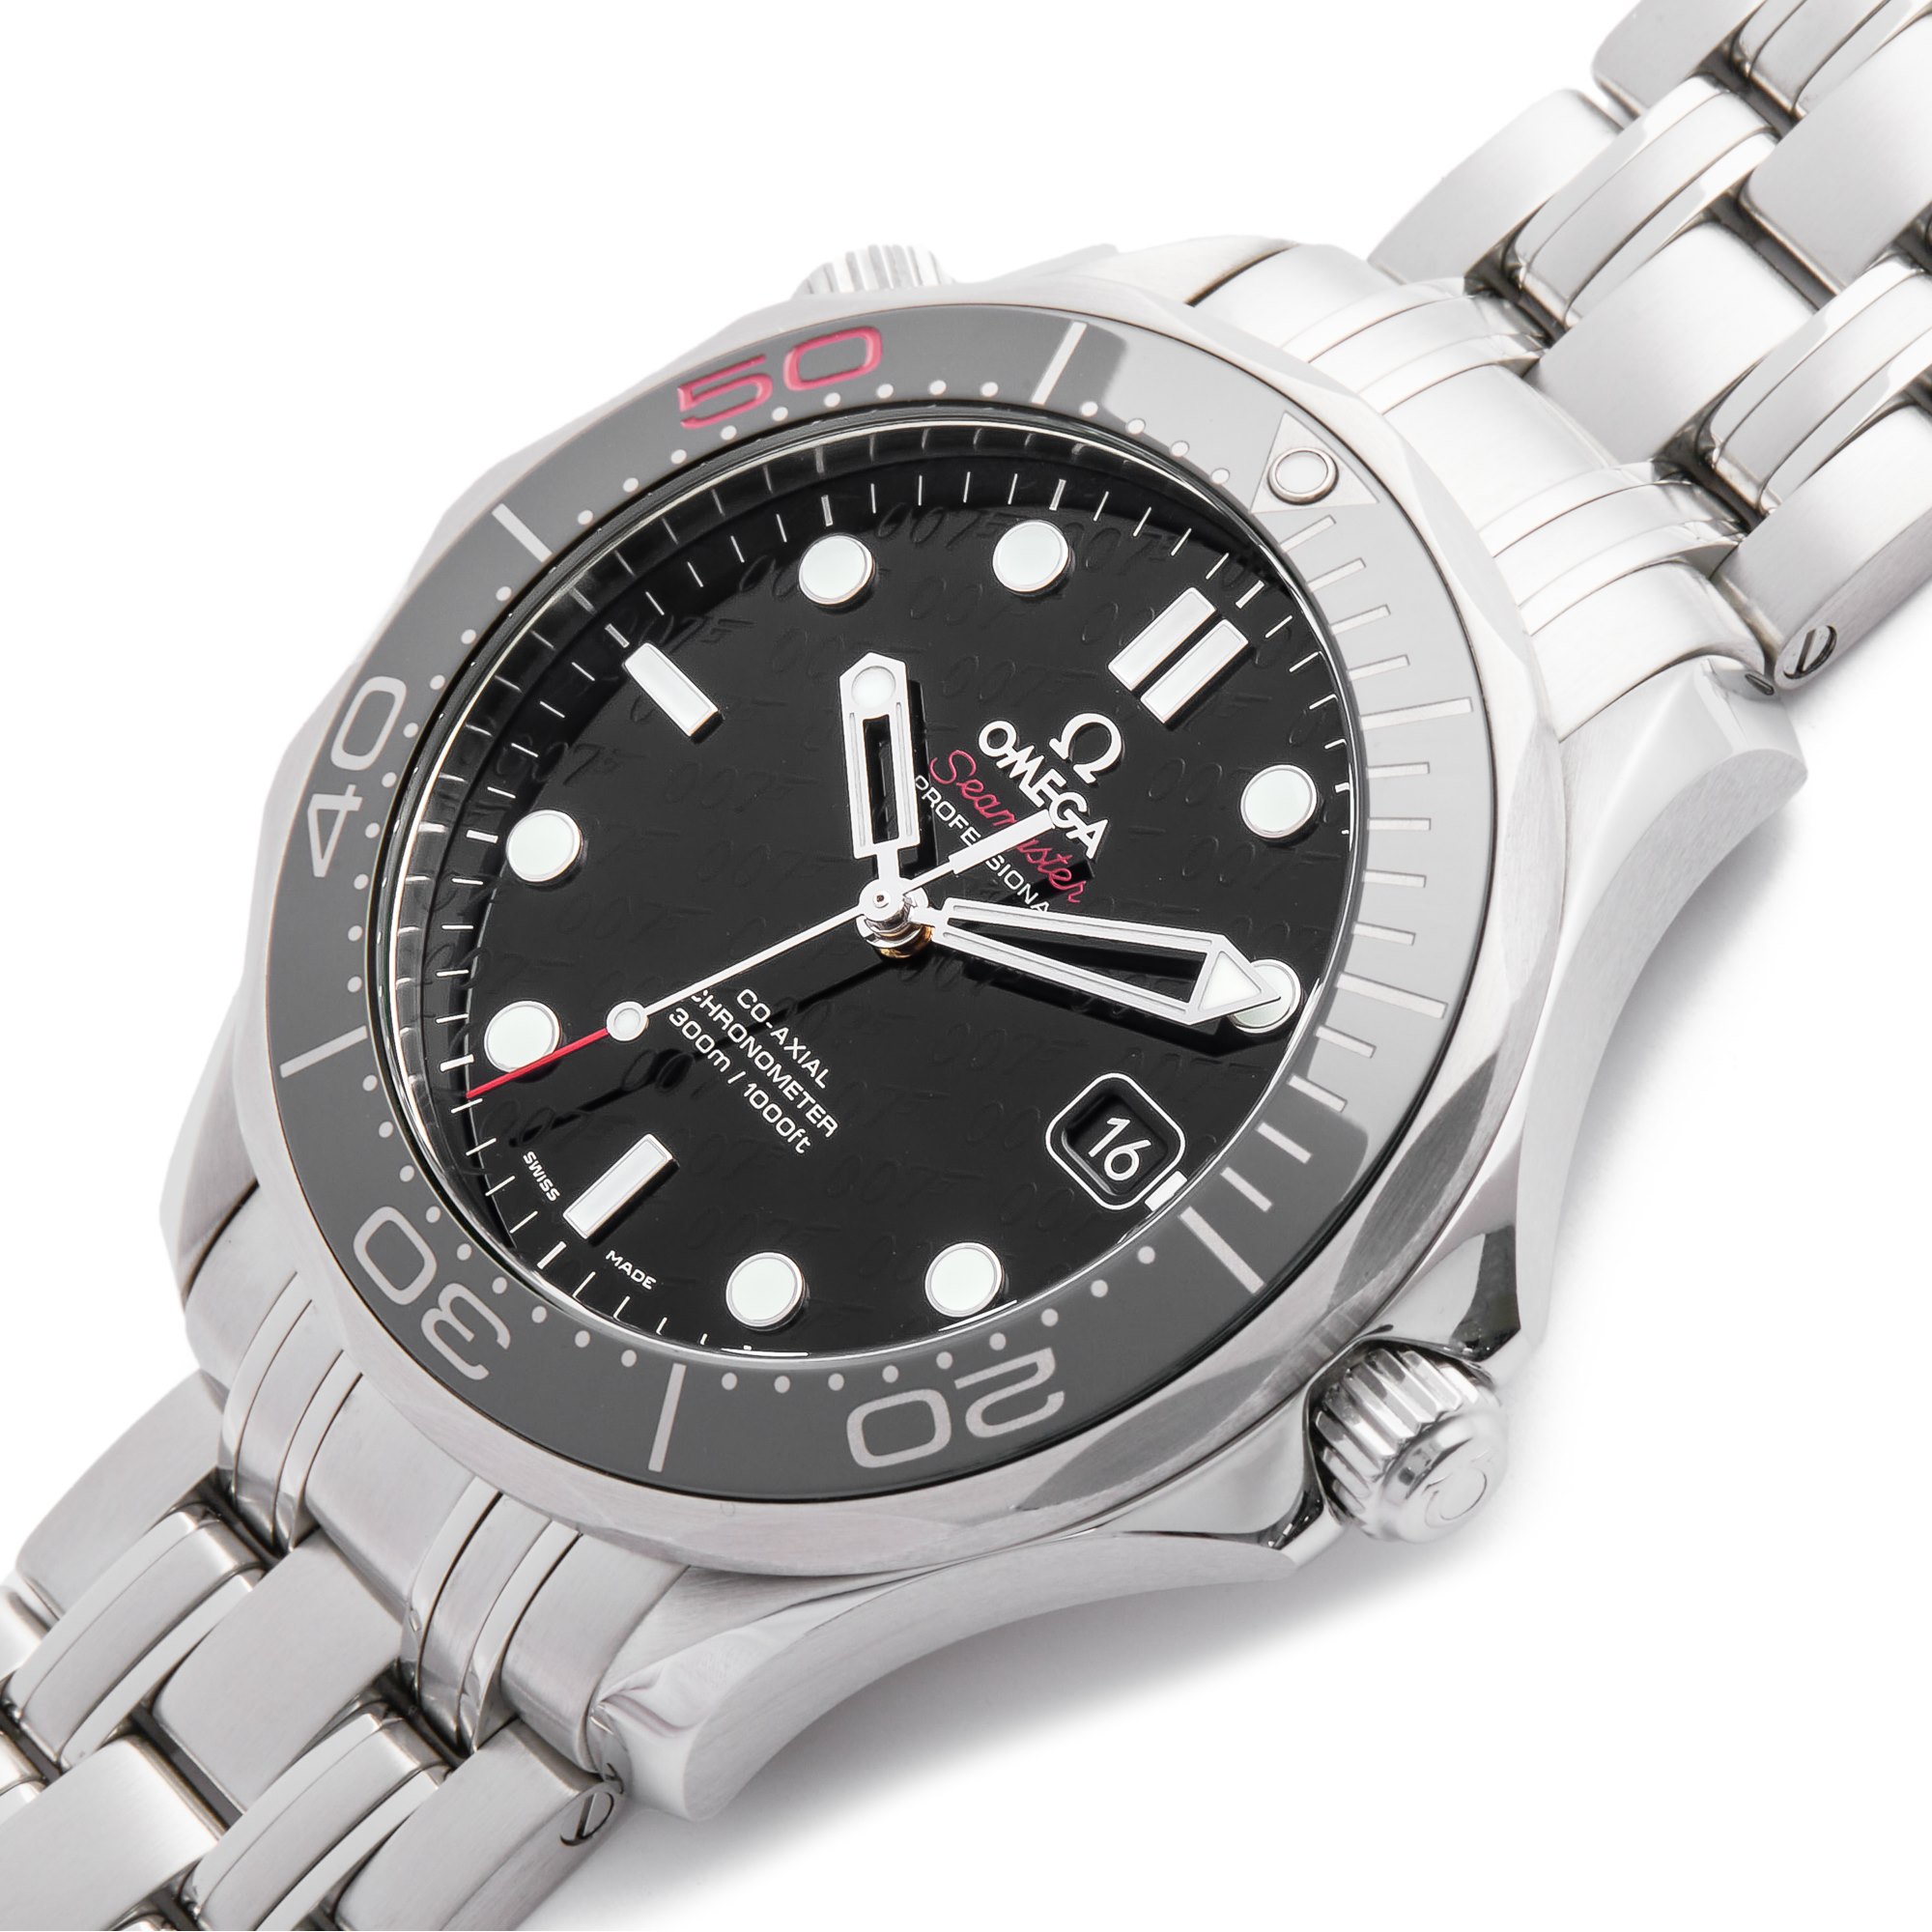 Omega Seamaster 300m James Bond Limited Edition to 11007 Pieces Roestvrij Staal 212.30.41.20.01.005